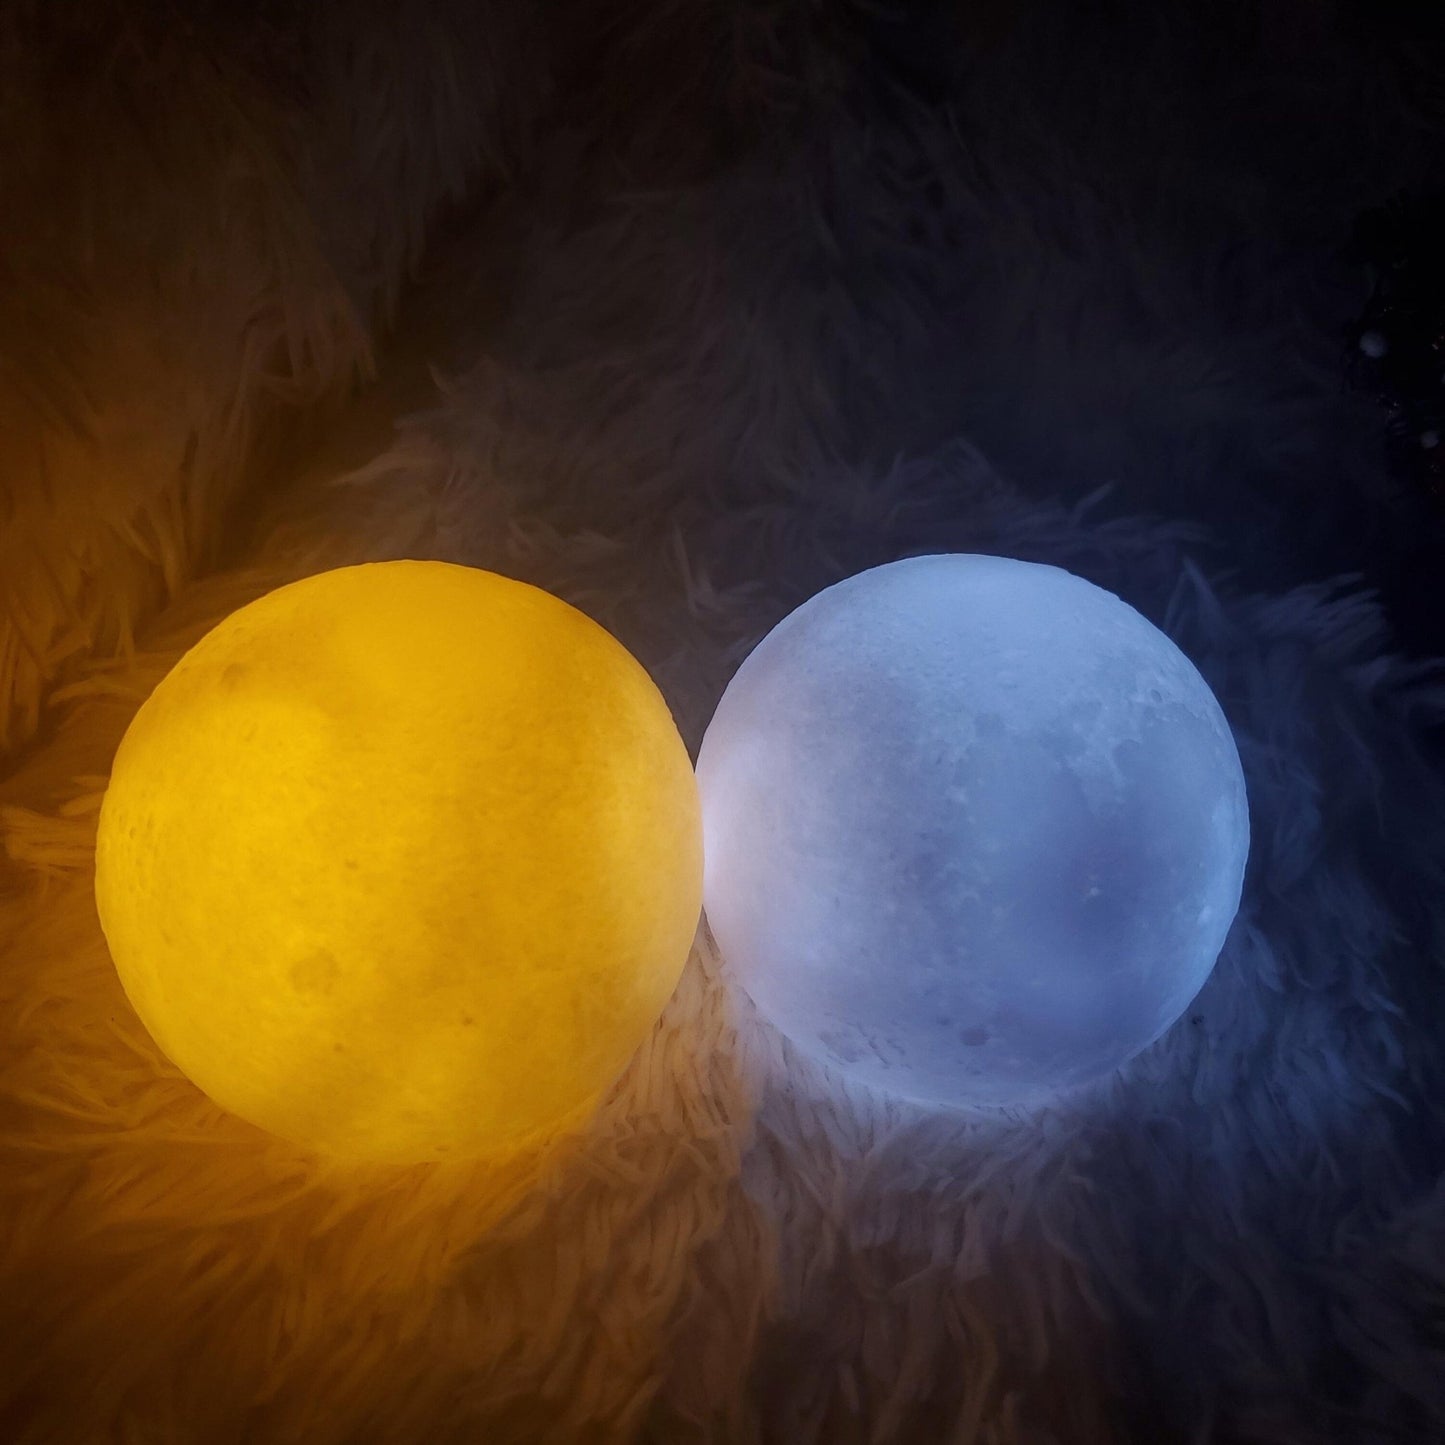 Moon LED Props - Space Mesmerise - Space Gifts | Lamps | Statues | Home Decor